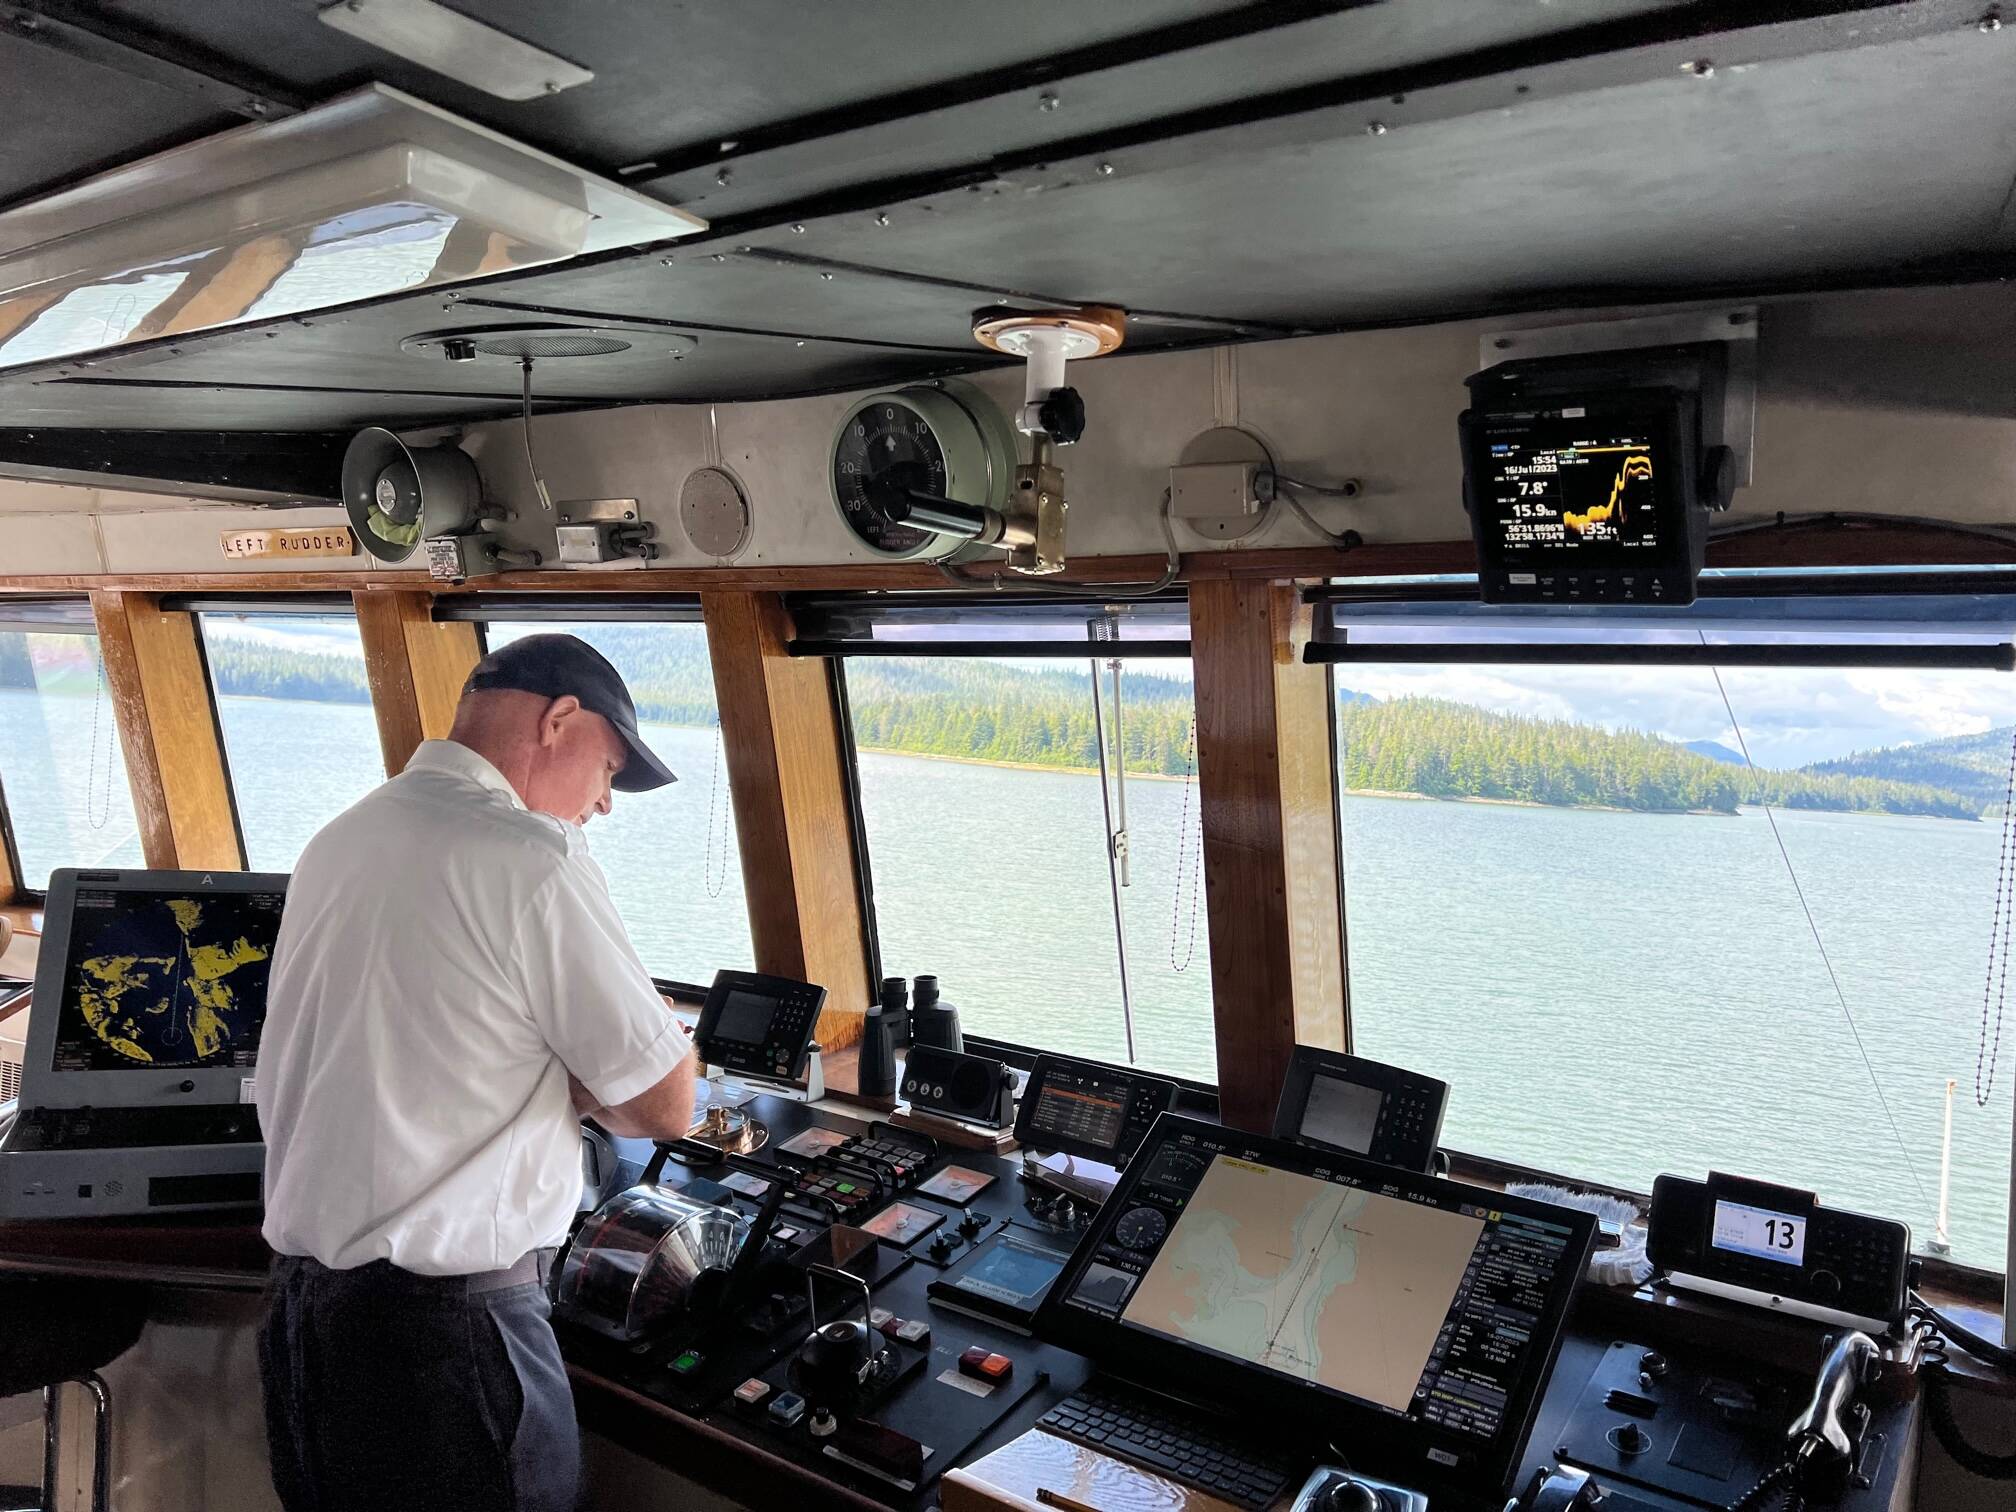 Capt. Dave Turner, who has been with the Alaska Marine Highway System for 14 years, scans some of the equipment on the Columbia. He makes a point of being approachable by crew, but said in the end, “it’s my license.” (Meredith Jordan / Juneau Empire)